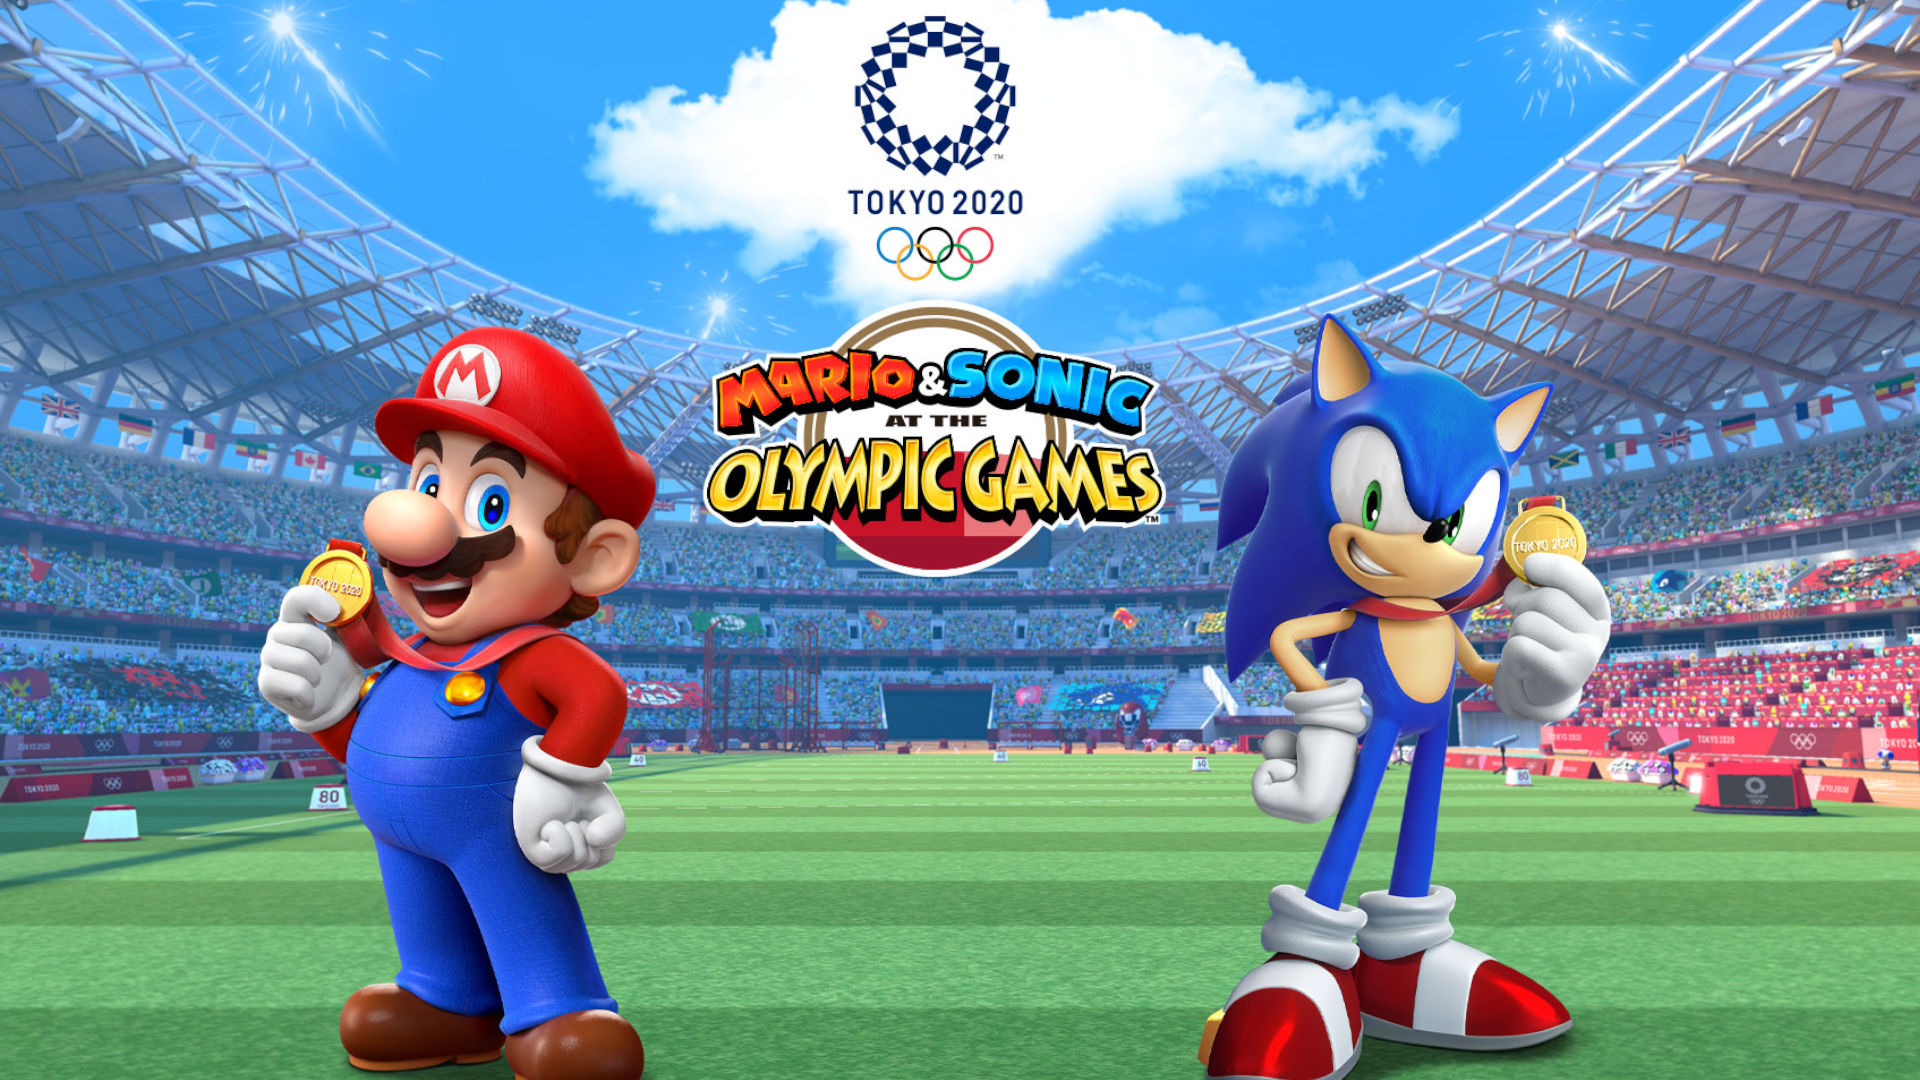 Mario and Sonic at the Tokyo 2020 Olympic Games cover, with mario and sonic standing in a stadium